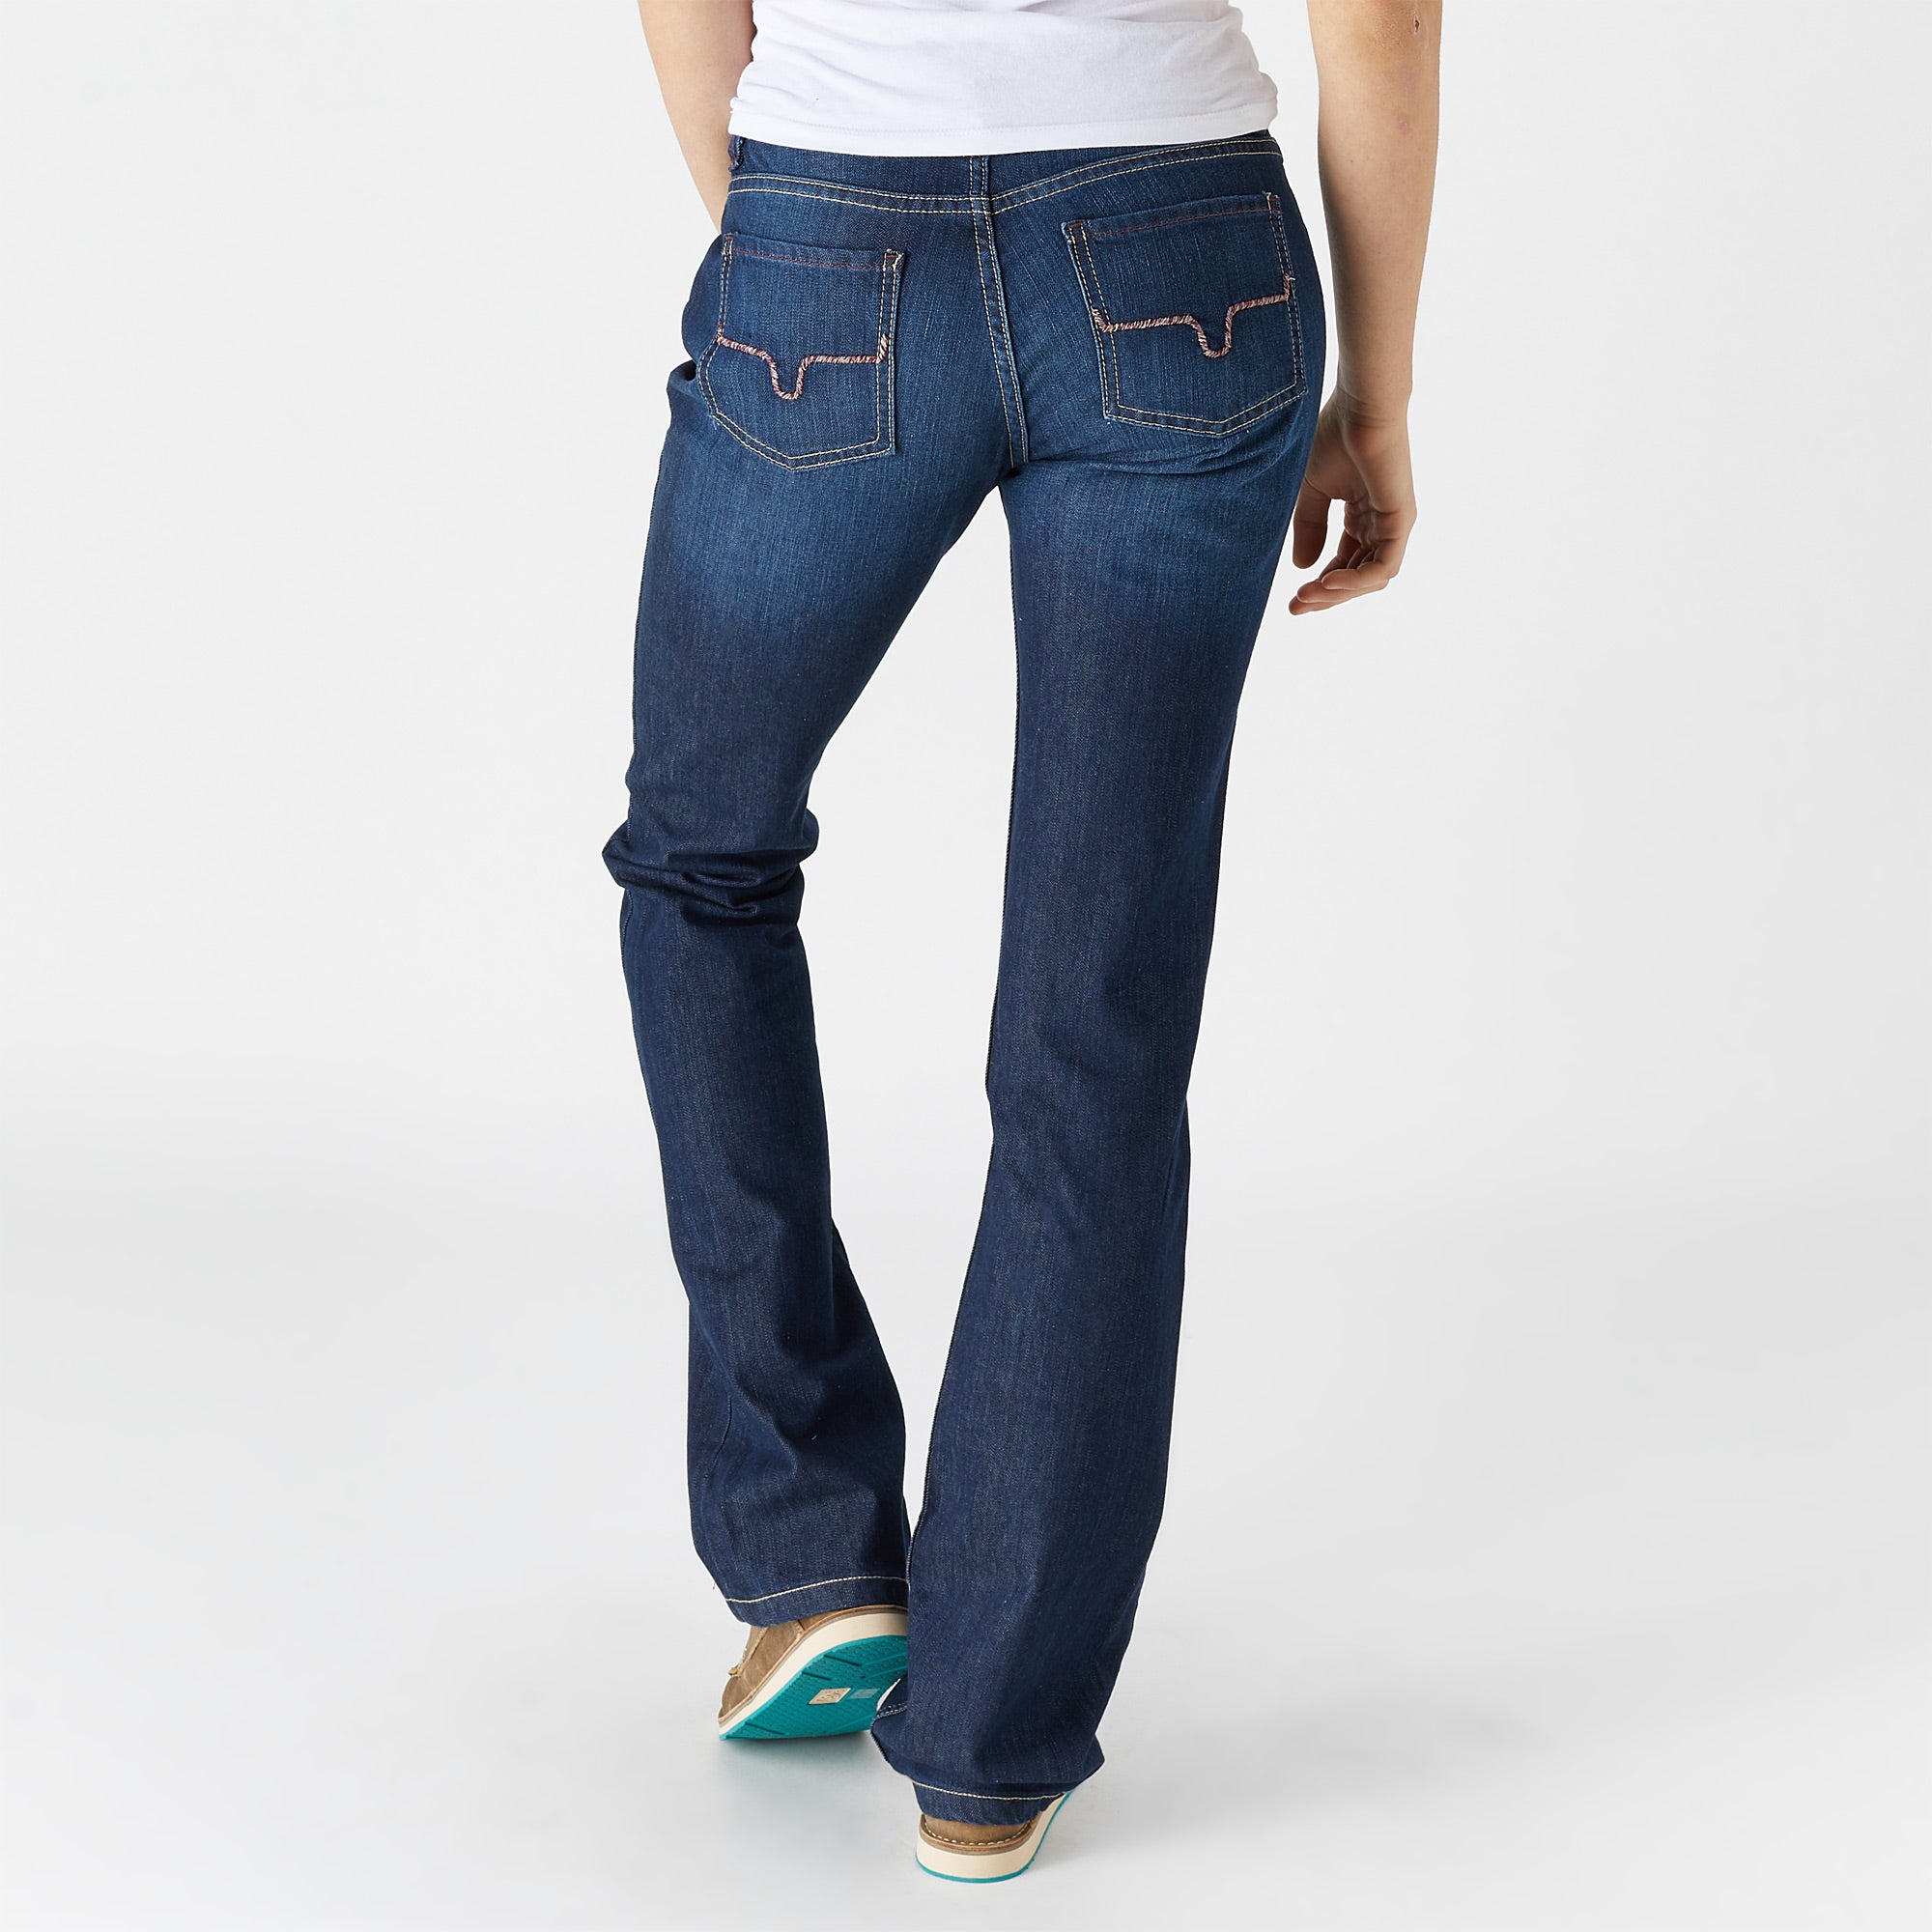 Kimes Ranch Women's Alex Relaxed Fit Jeans